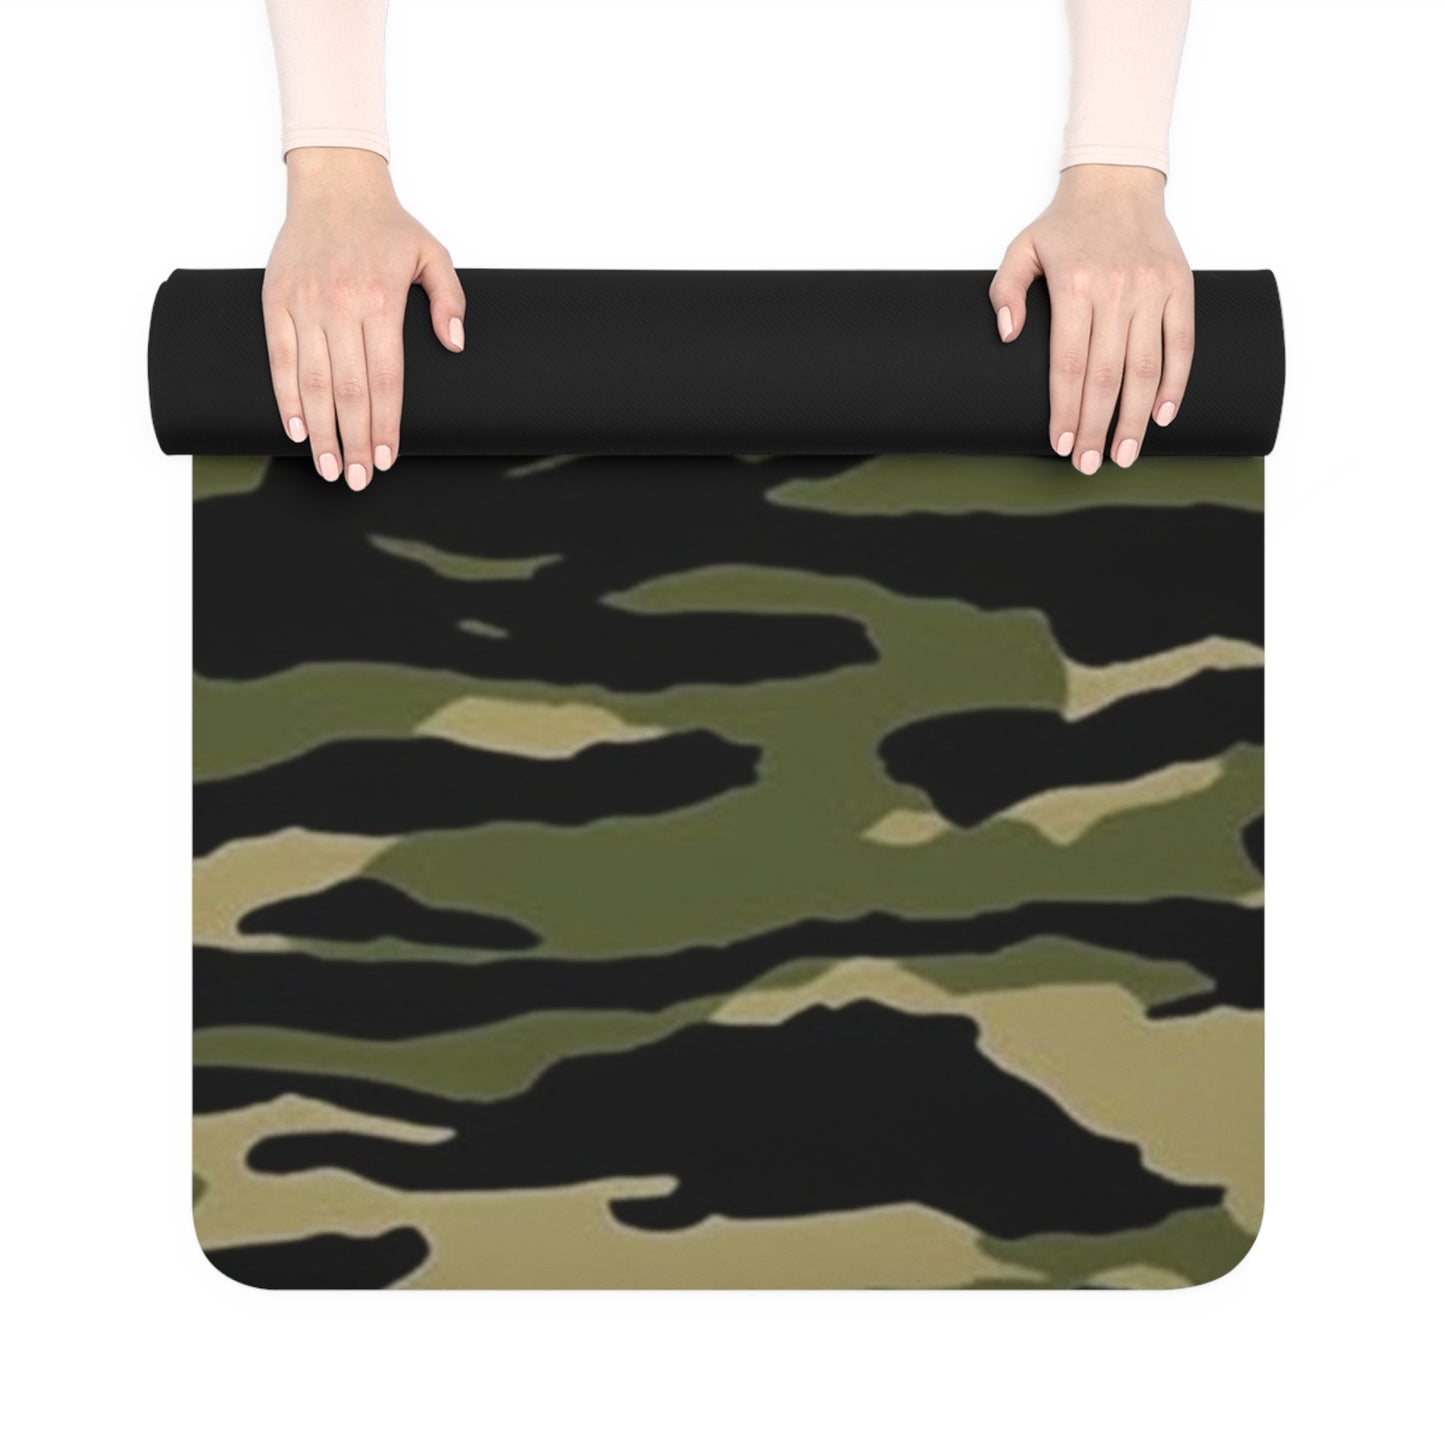 Tiger Stripe Camouflage: Military Style - Rubber Yoga Mat